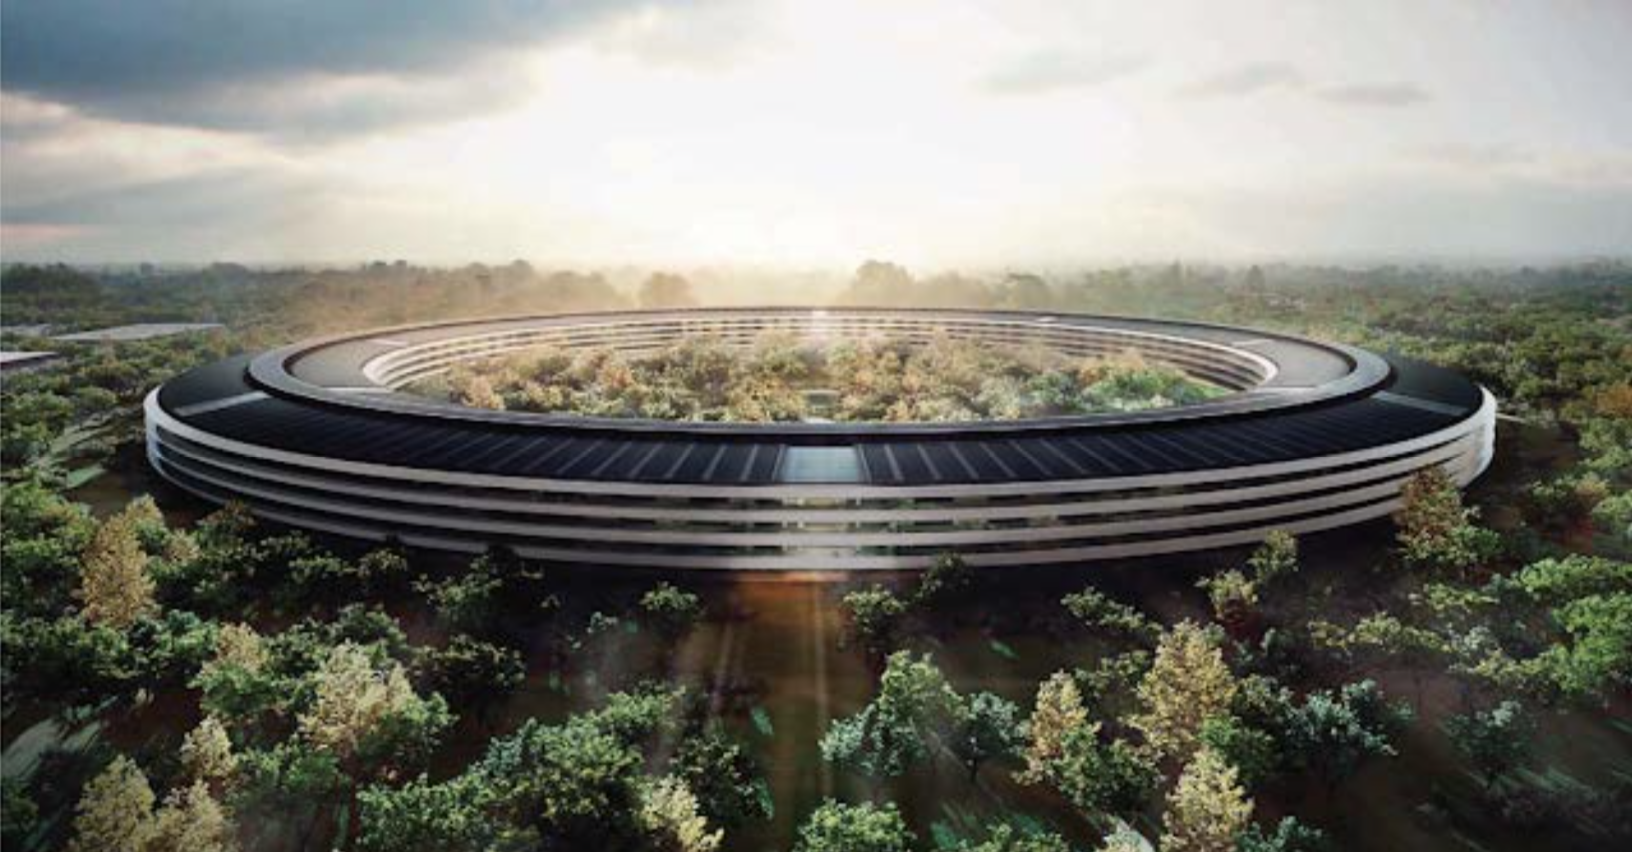 Figure 9. Concept drawing of Apple’s new “Spaceship” headquarters. (Source: Techboss24, http://techboss24.blogspot.com/2013/11/apples-new-spaceship-campus-see-unseen.html